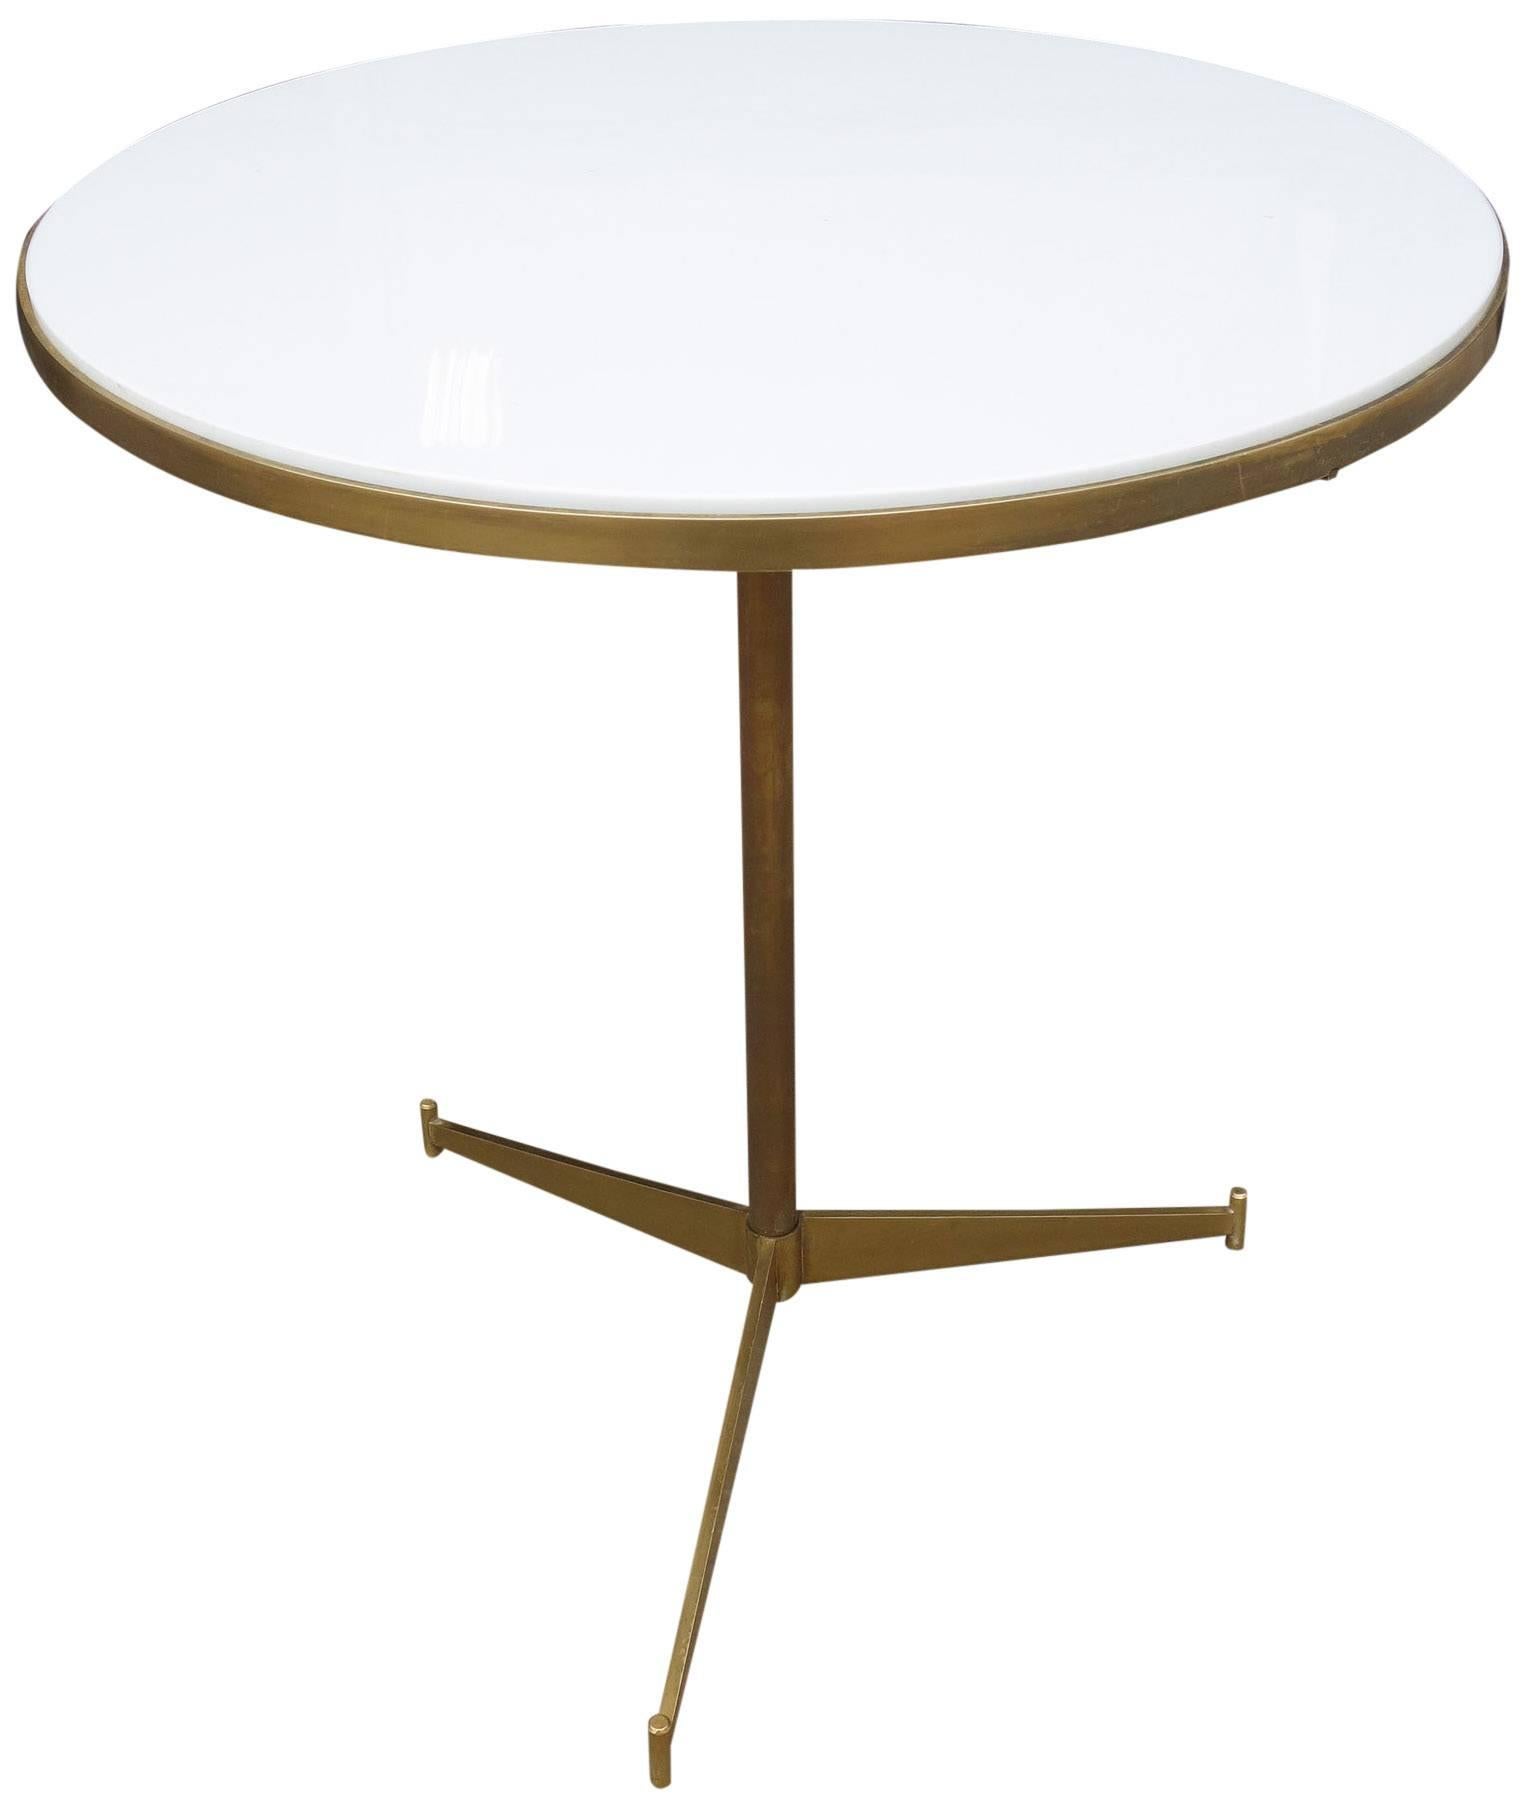 American Midcentury Paul McCobb Side Table for Directional